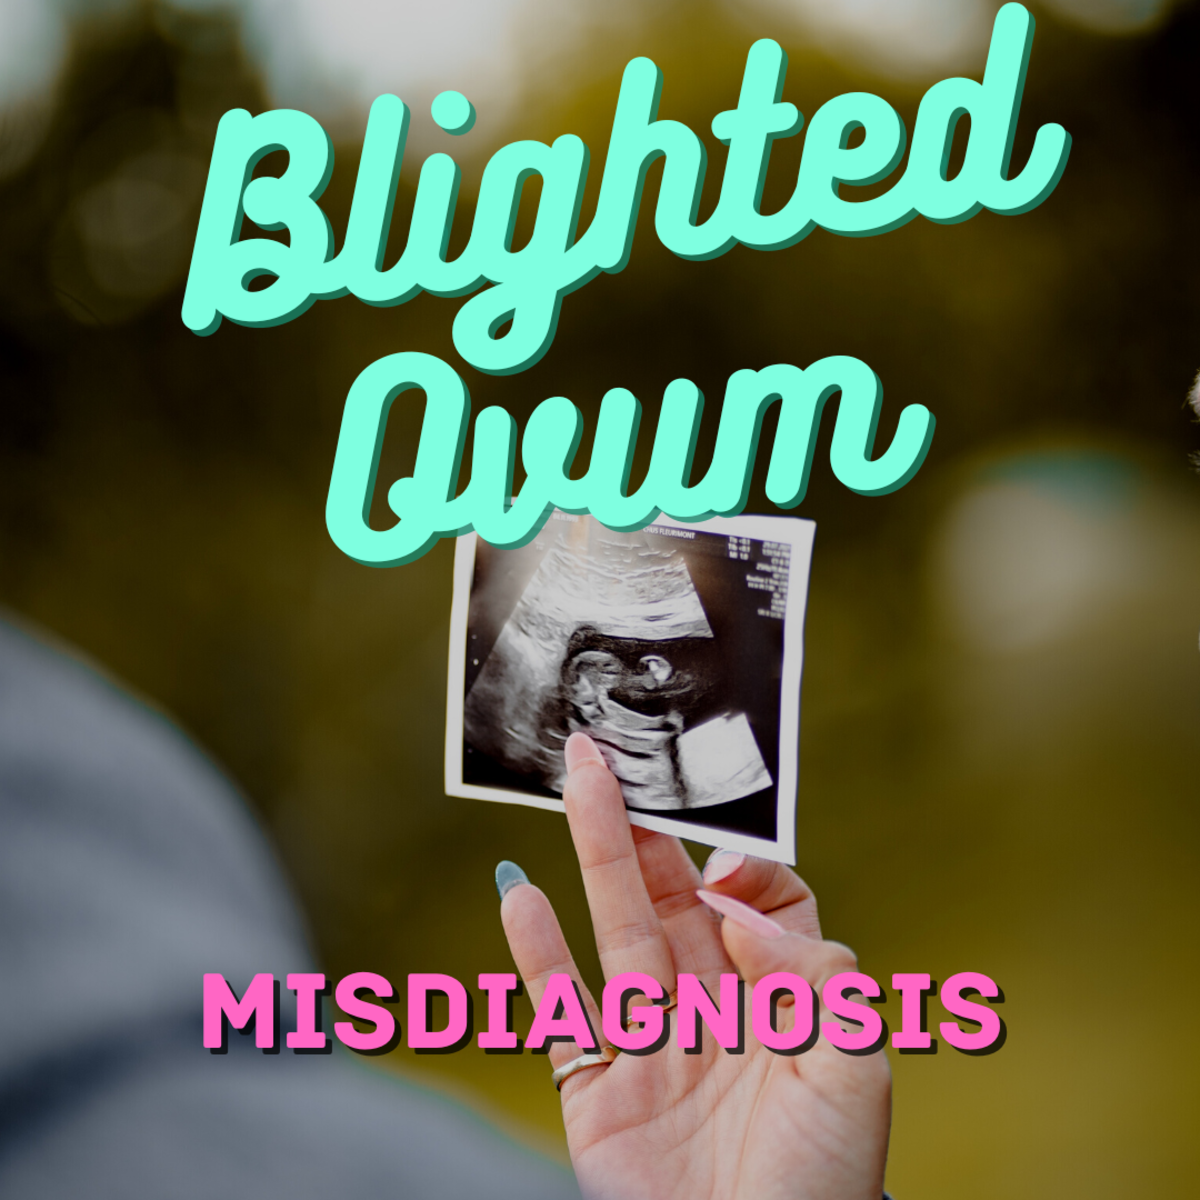 Is your blighted ovum a misdiagnosis? Here's my story.